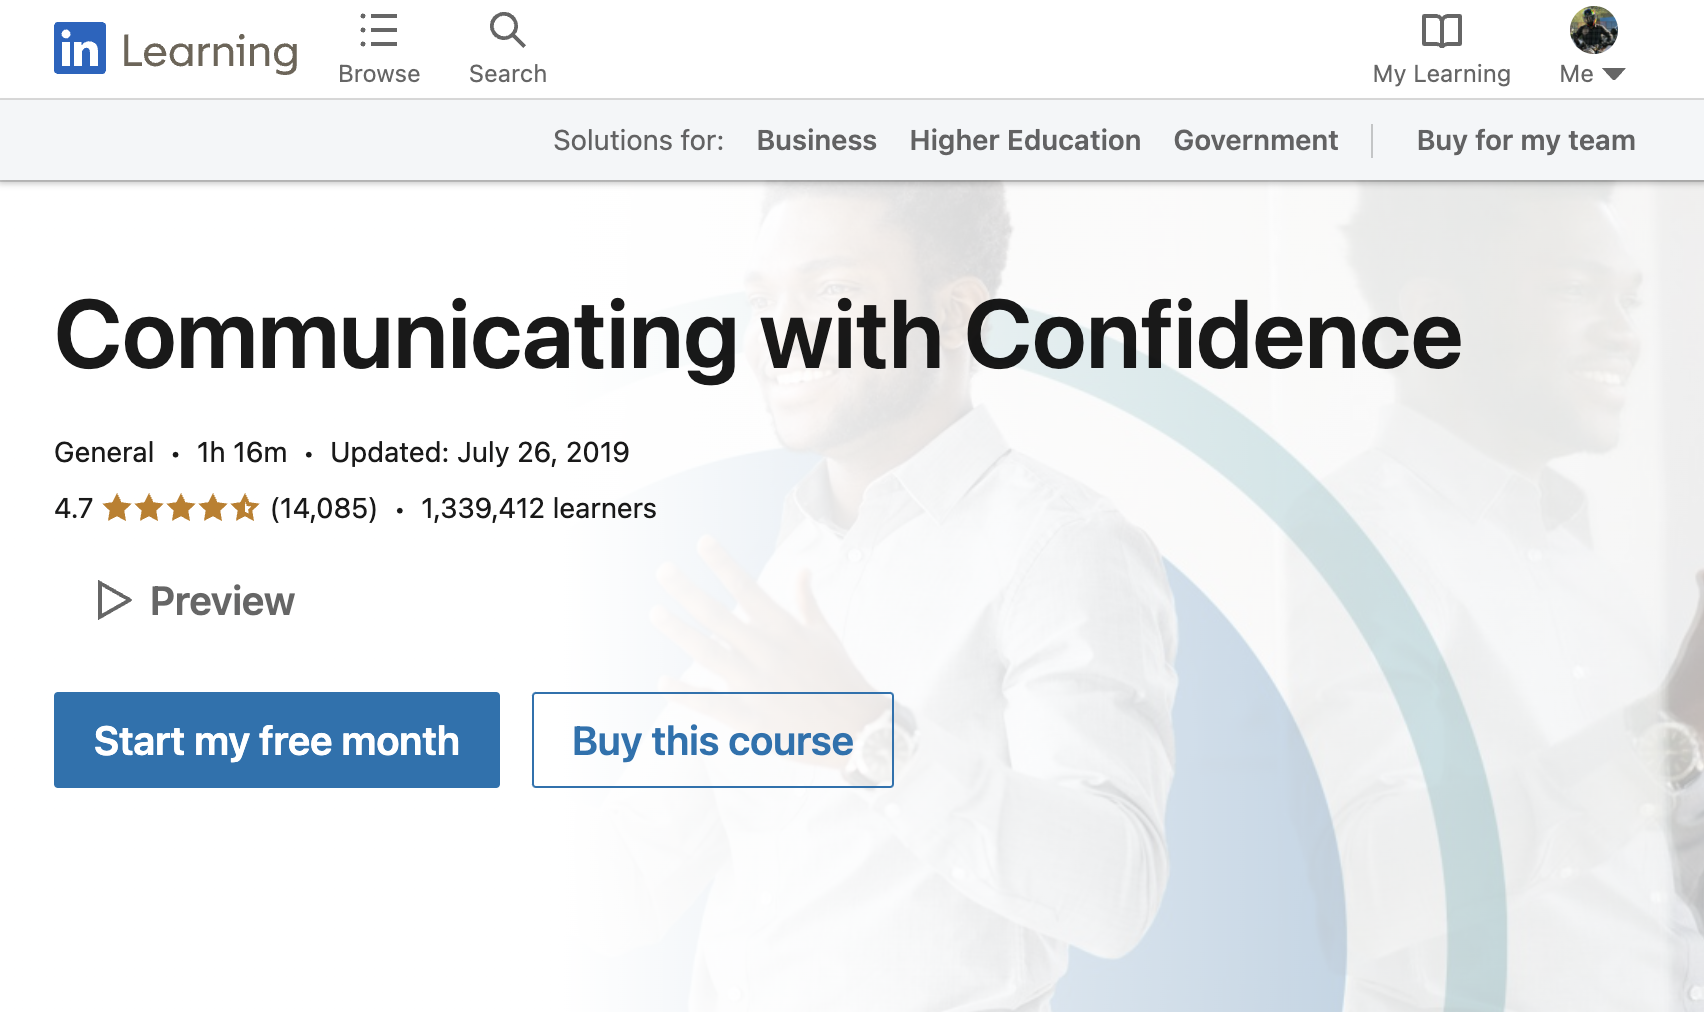 LinkedIn Learning Communicating With Confidence